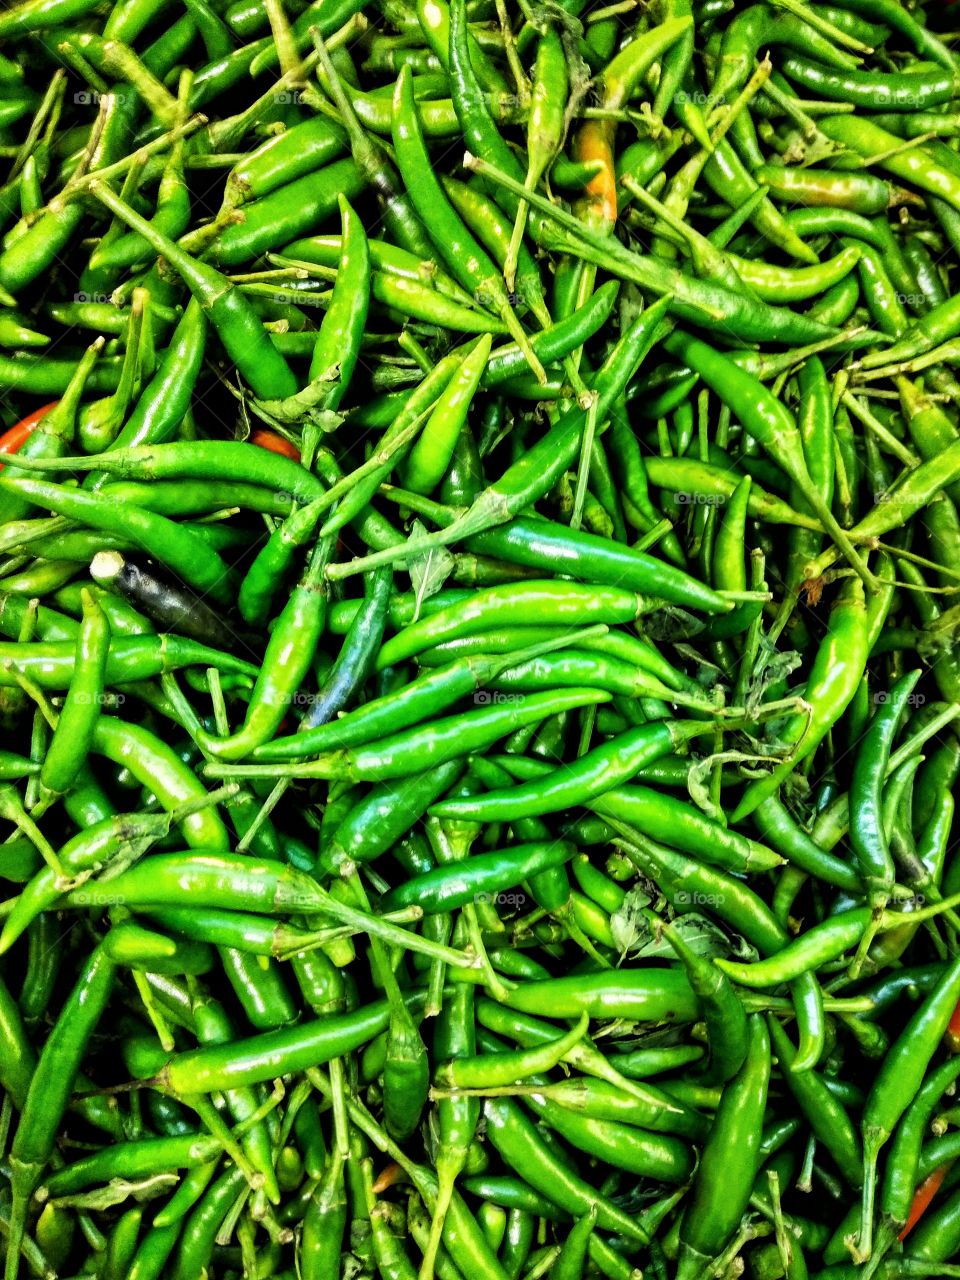 Fresh green chilies sold at the local farmers market